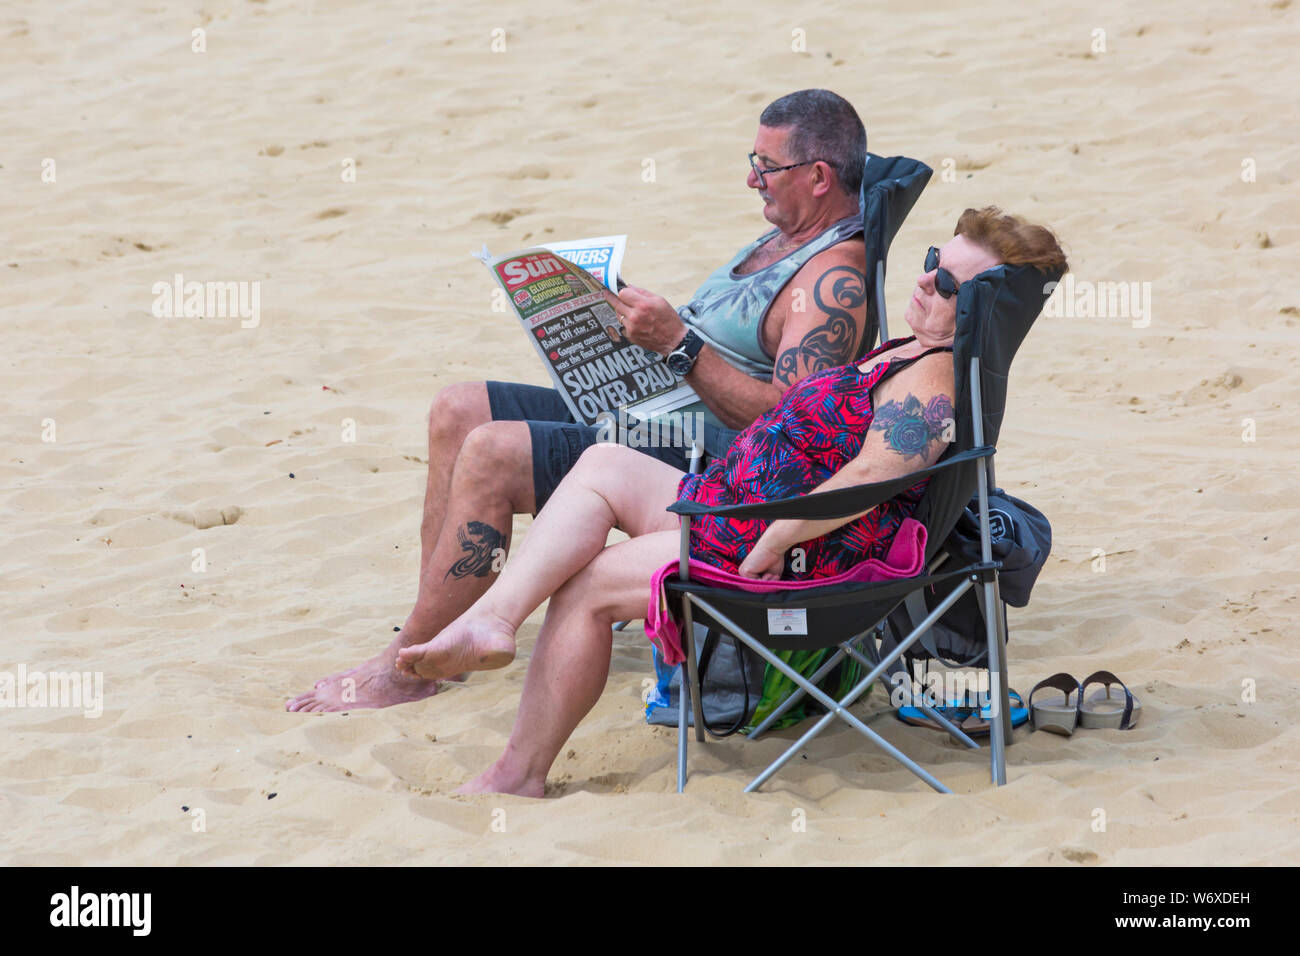 Bournemouth, Dorset UK. 3rd Aug 2019. UK weather: overcast and cloudy, but warm and muggy. Beach goers head to the beaches at Bournemouth to enjoy the warm weather. Couple relaxing in chairs on the beach, man reading the Sun newspaper. Credit: Carolyn Jenkins/Alamy Live News Stock Photo